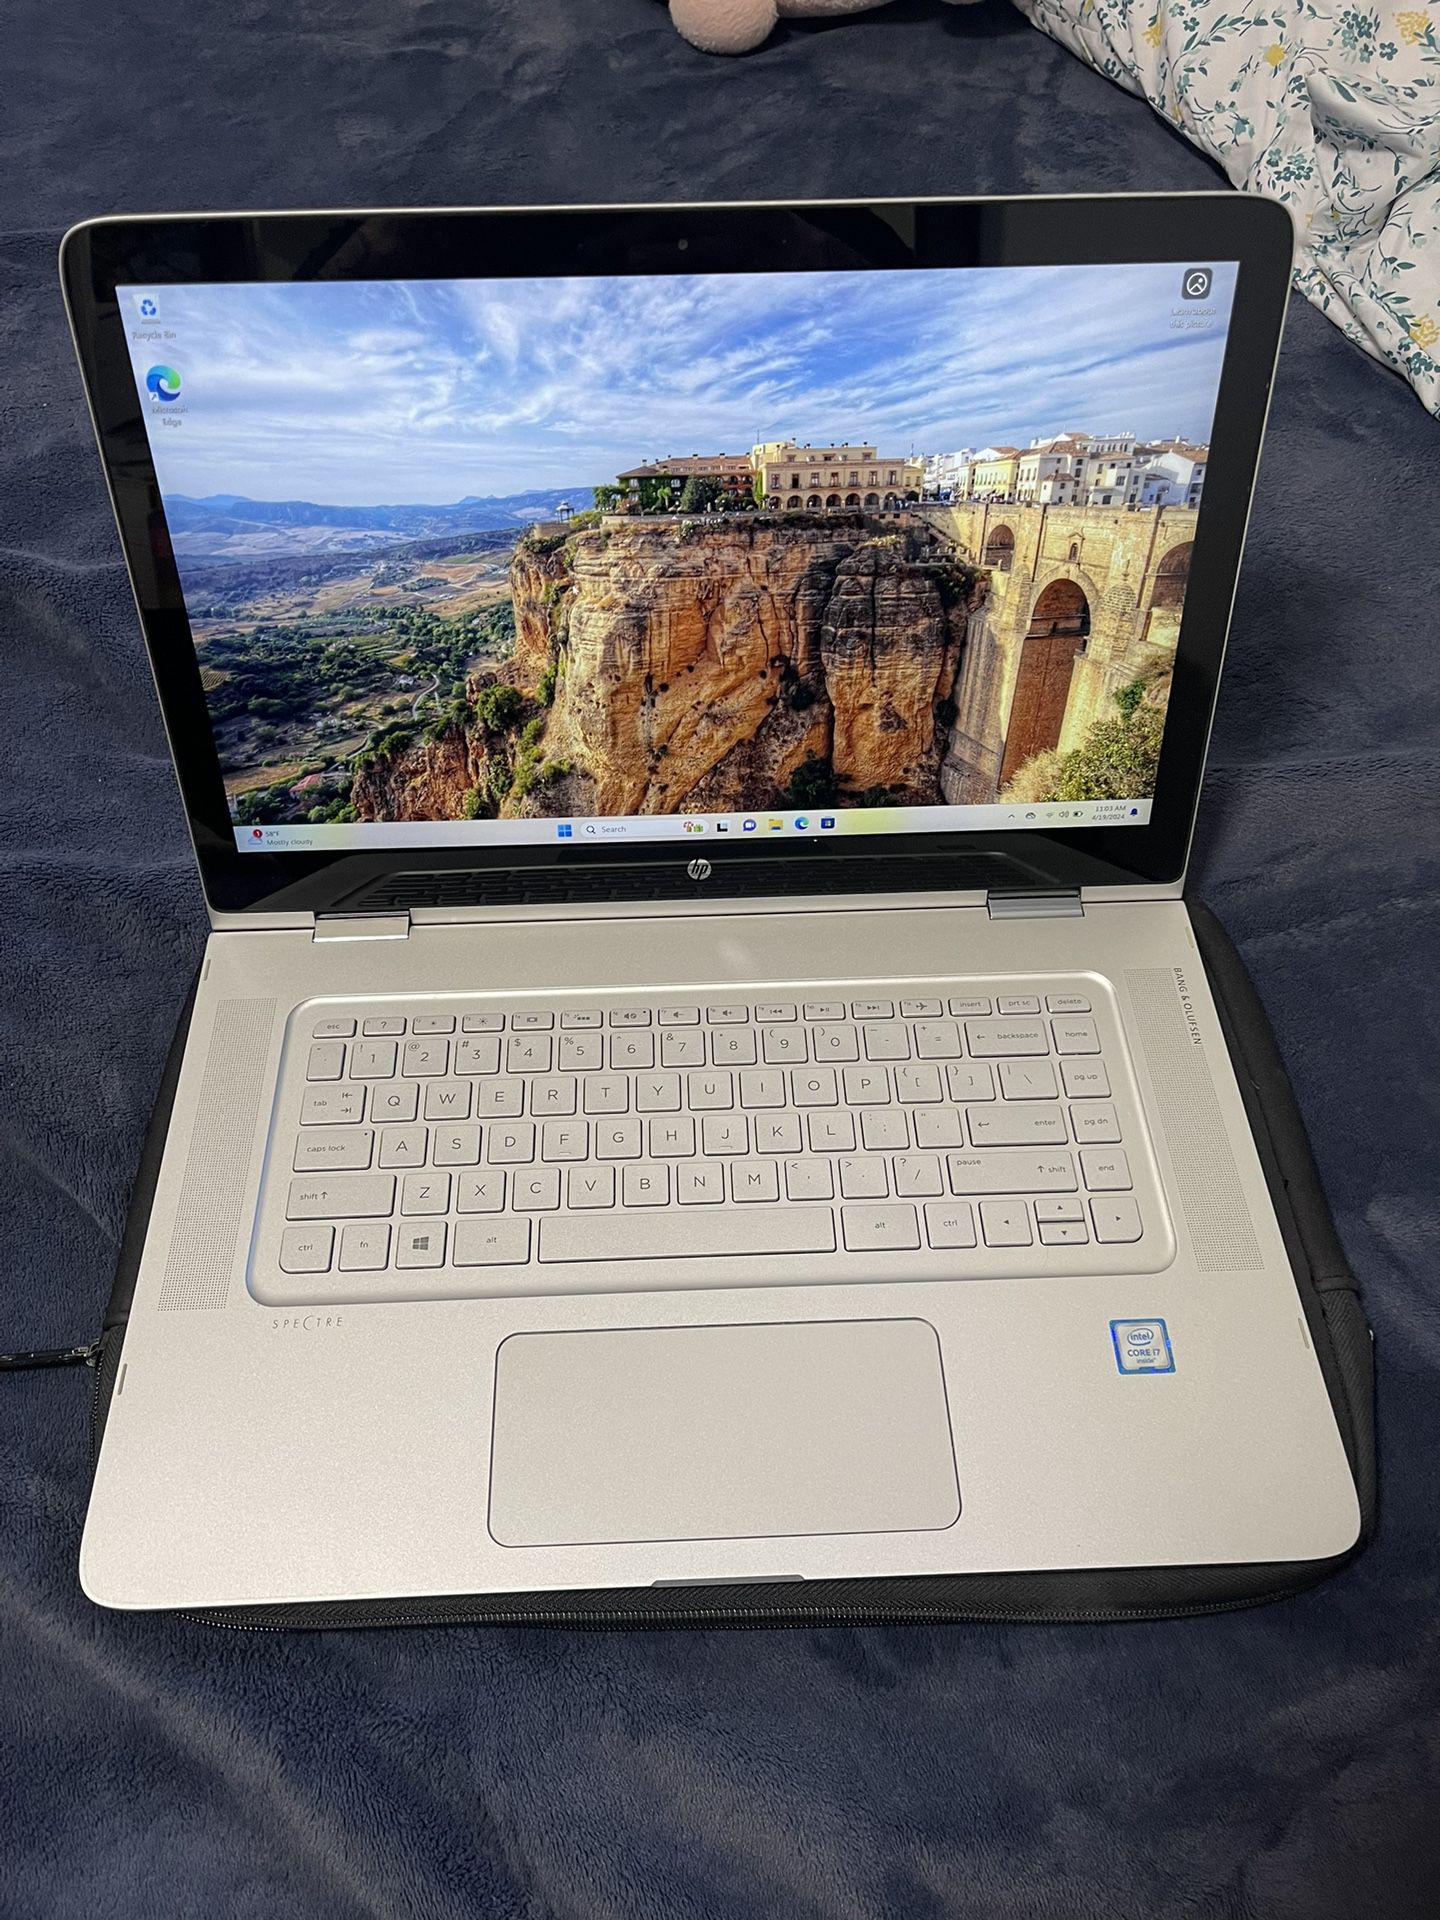 HP - Spectre x360 2-in-1 15” Touch-Screen Laptop - Intel Core i7 - 16GB Memory - 256GB Solid State Drive - Silver in excellent condition